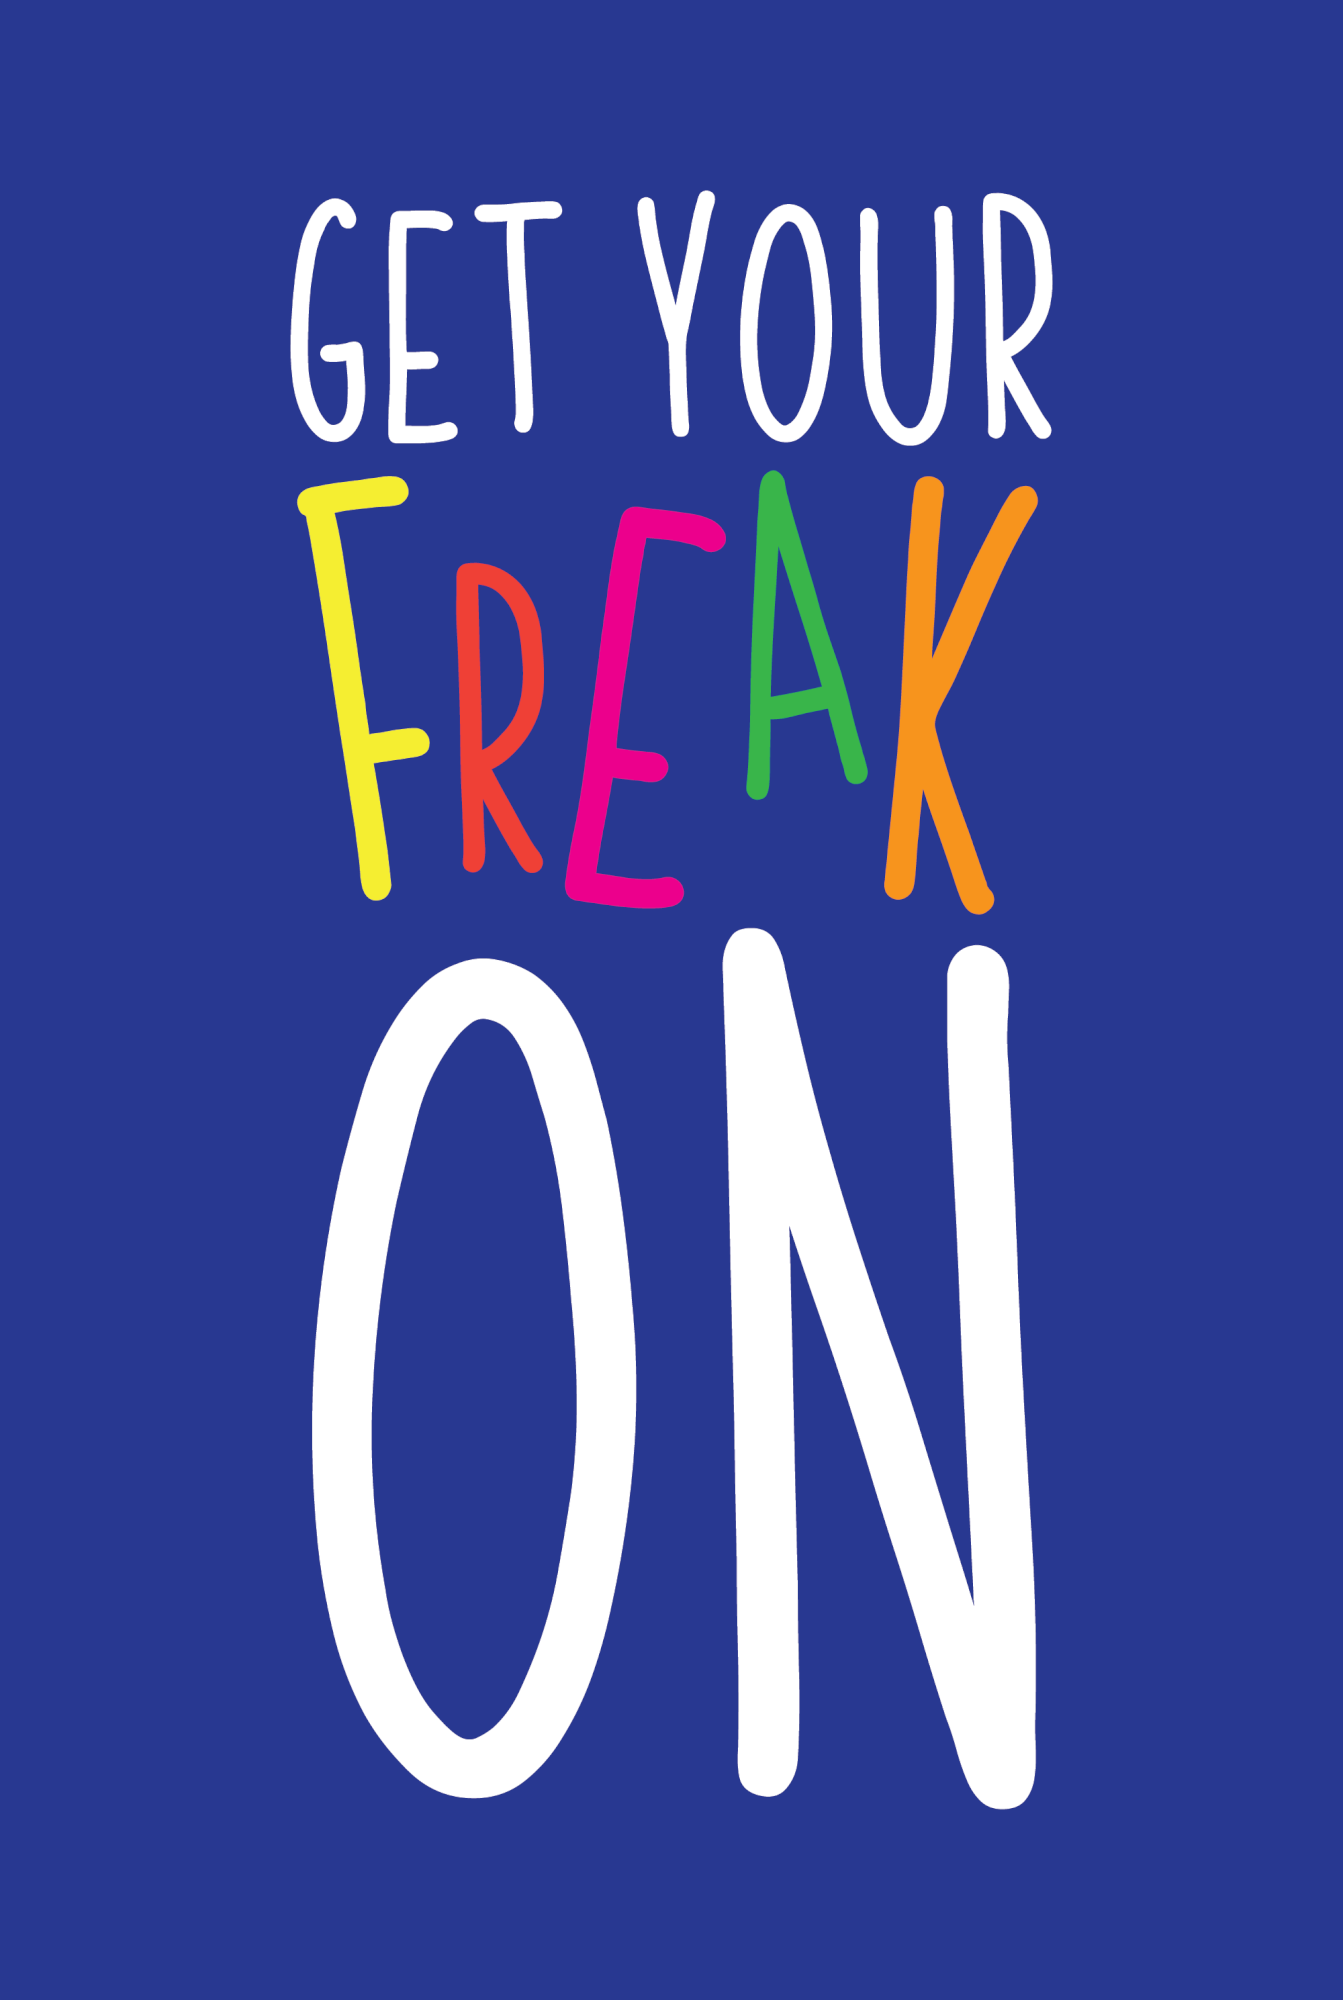 Get Your Freak On  5c0d2e39a7608 